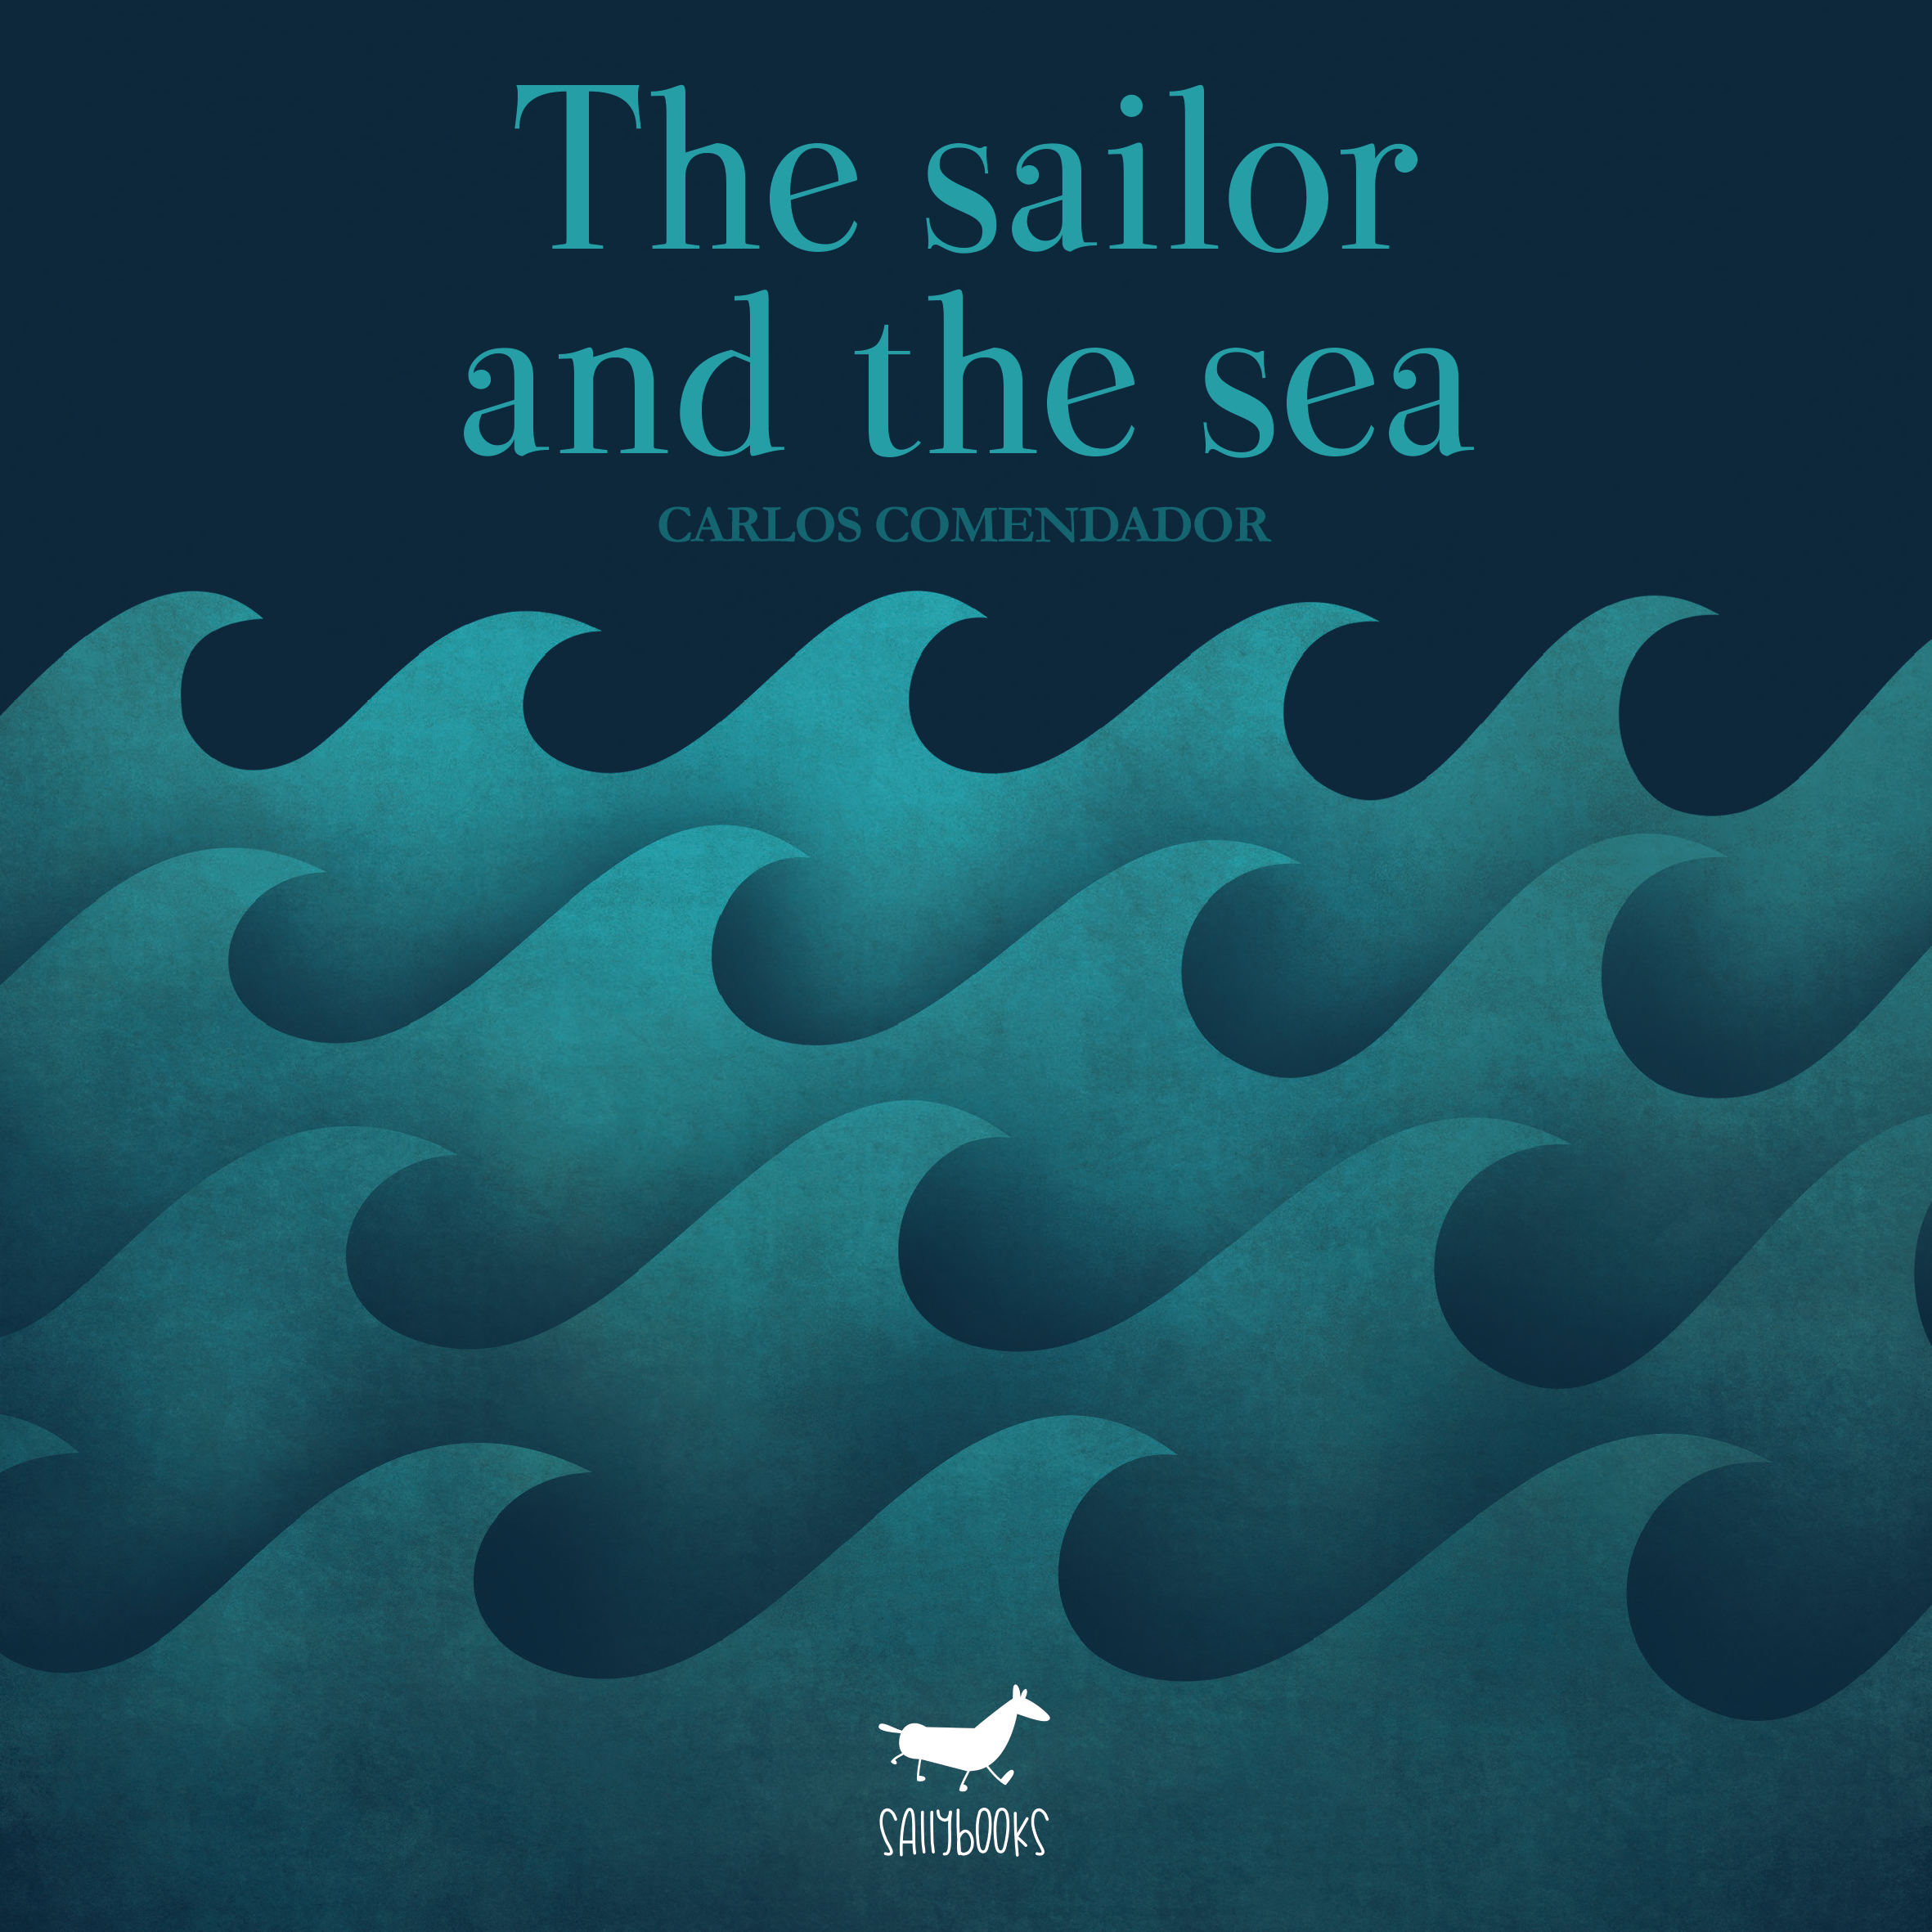 THE SAILOR AND THE SEA